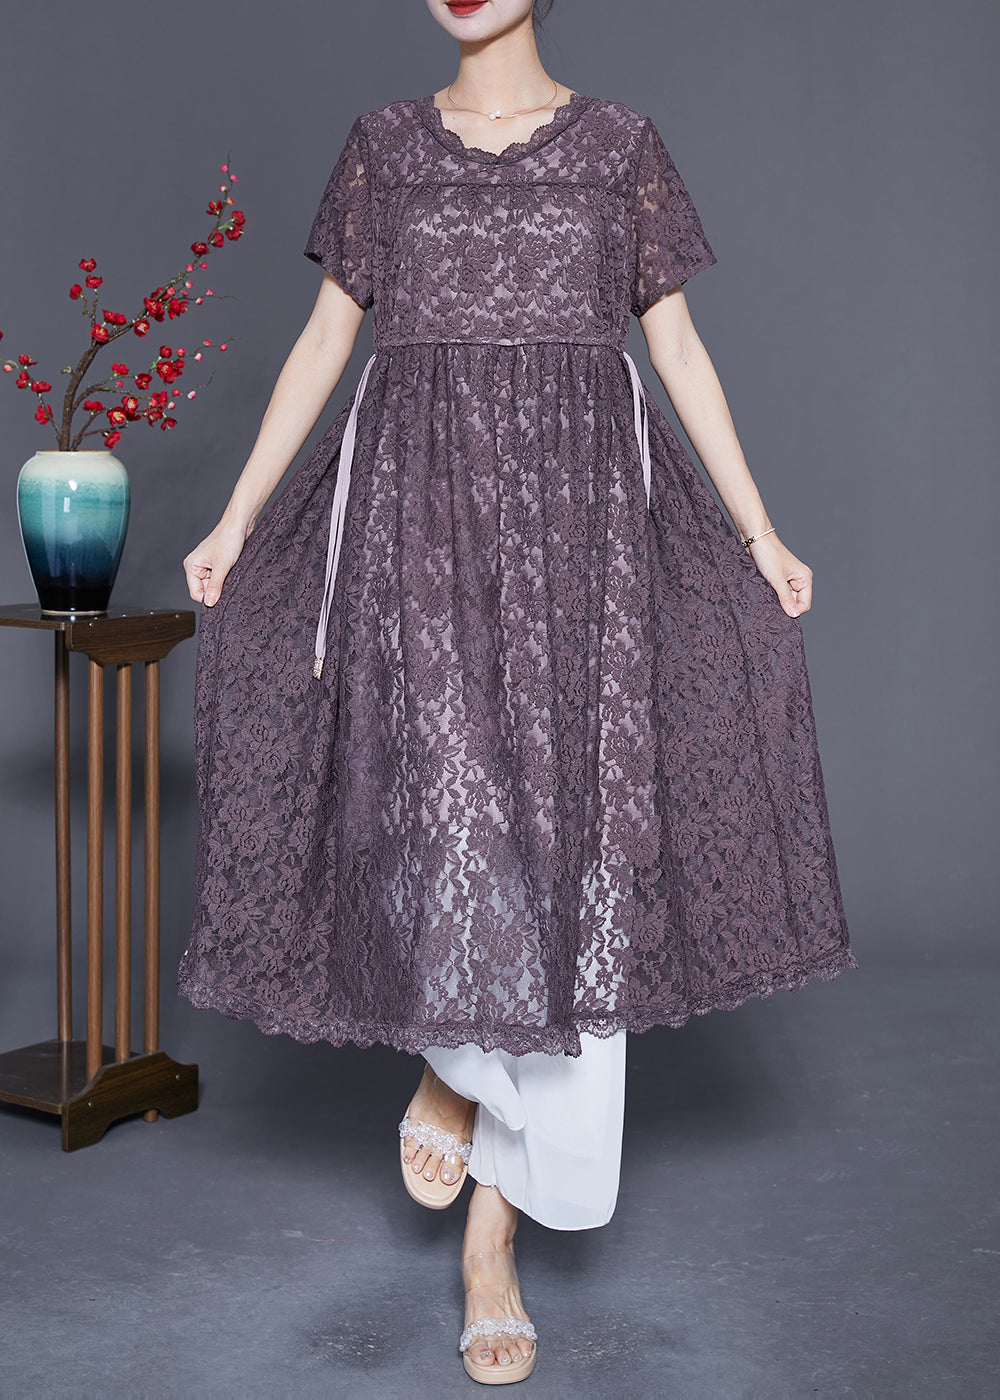 Slim Fit Grey Purple Cinched Hollow Out Lace Dress Summer